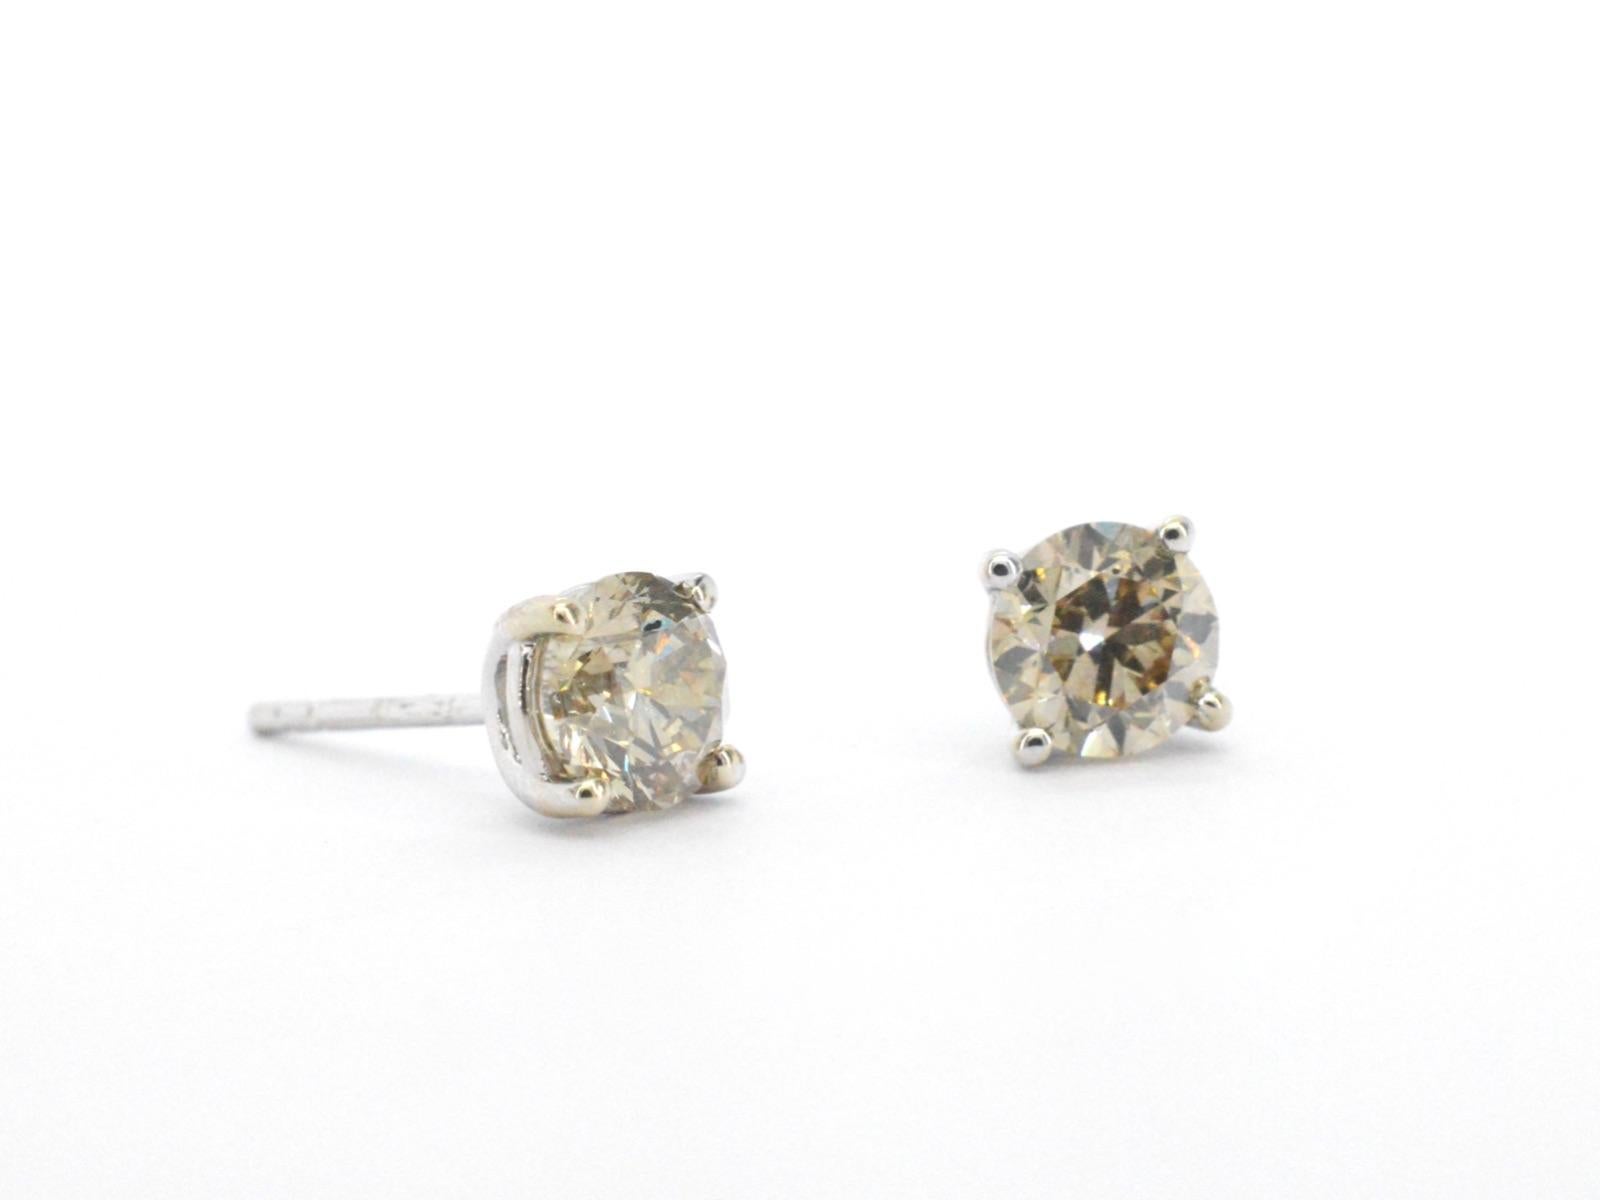 Gold Solitaire Earrings with Champagne Diamond 2